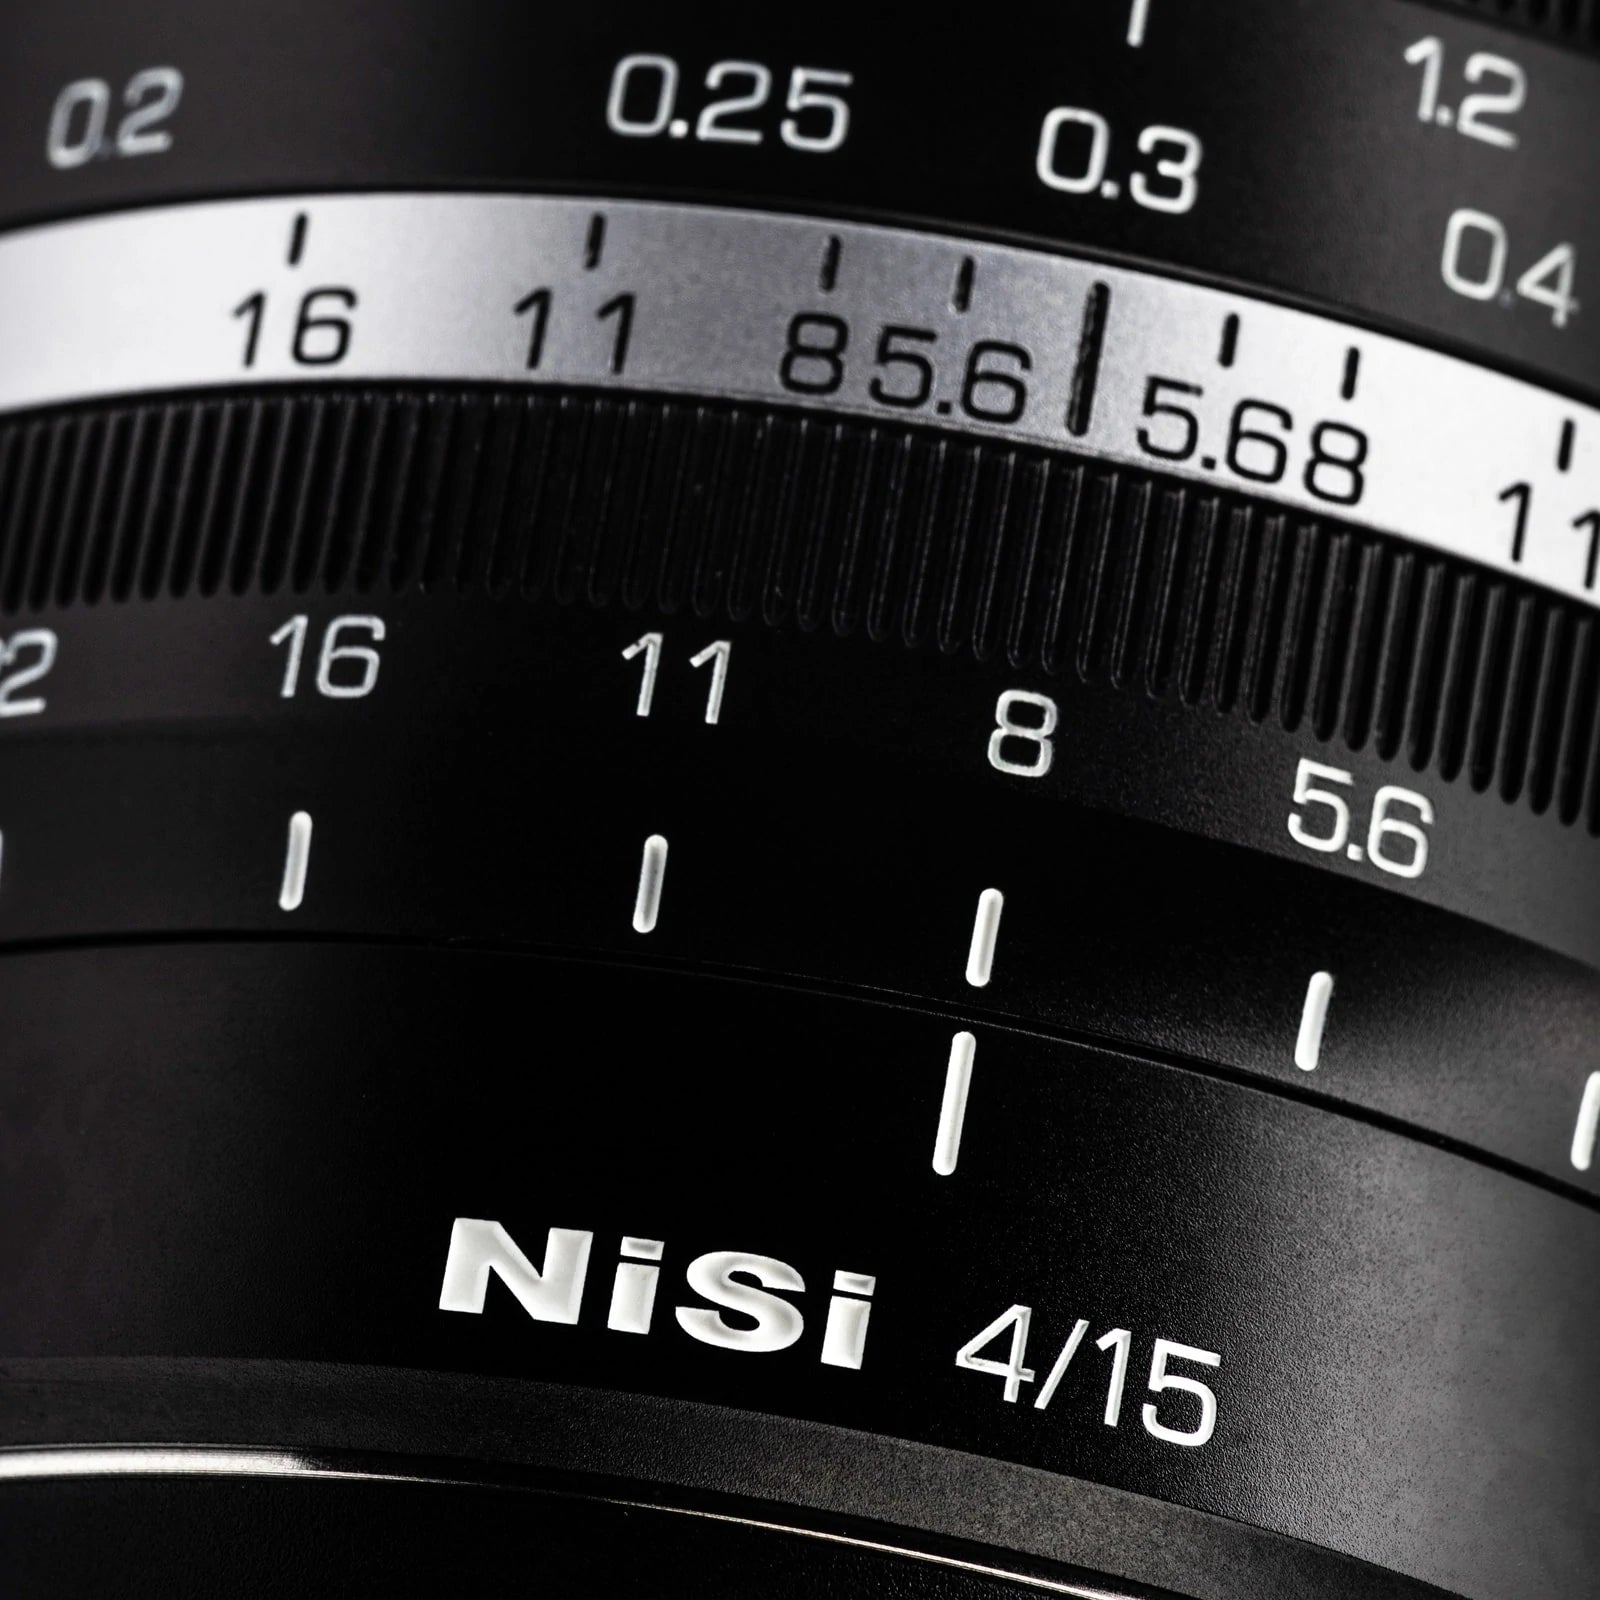 NISI 15MM F/4 ASPH WIDE ANGLE LENS